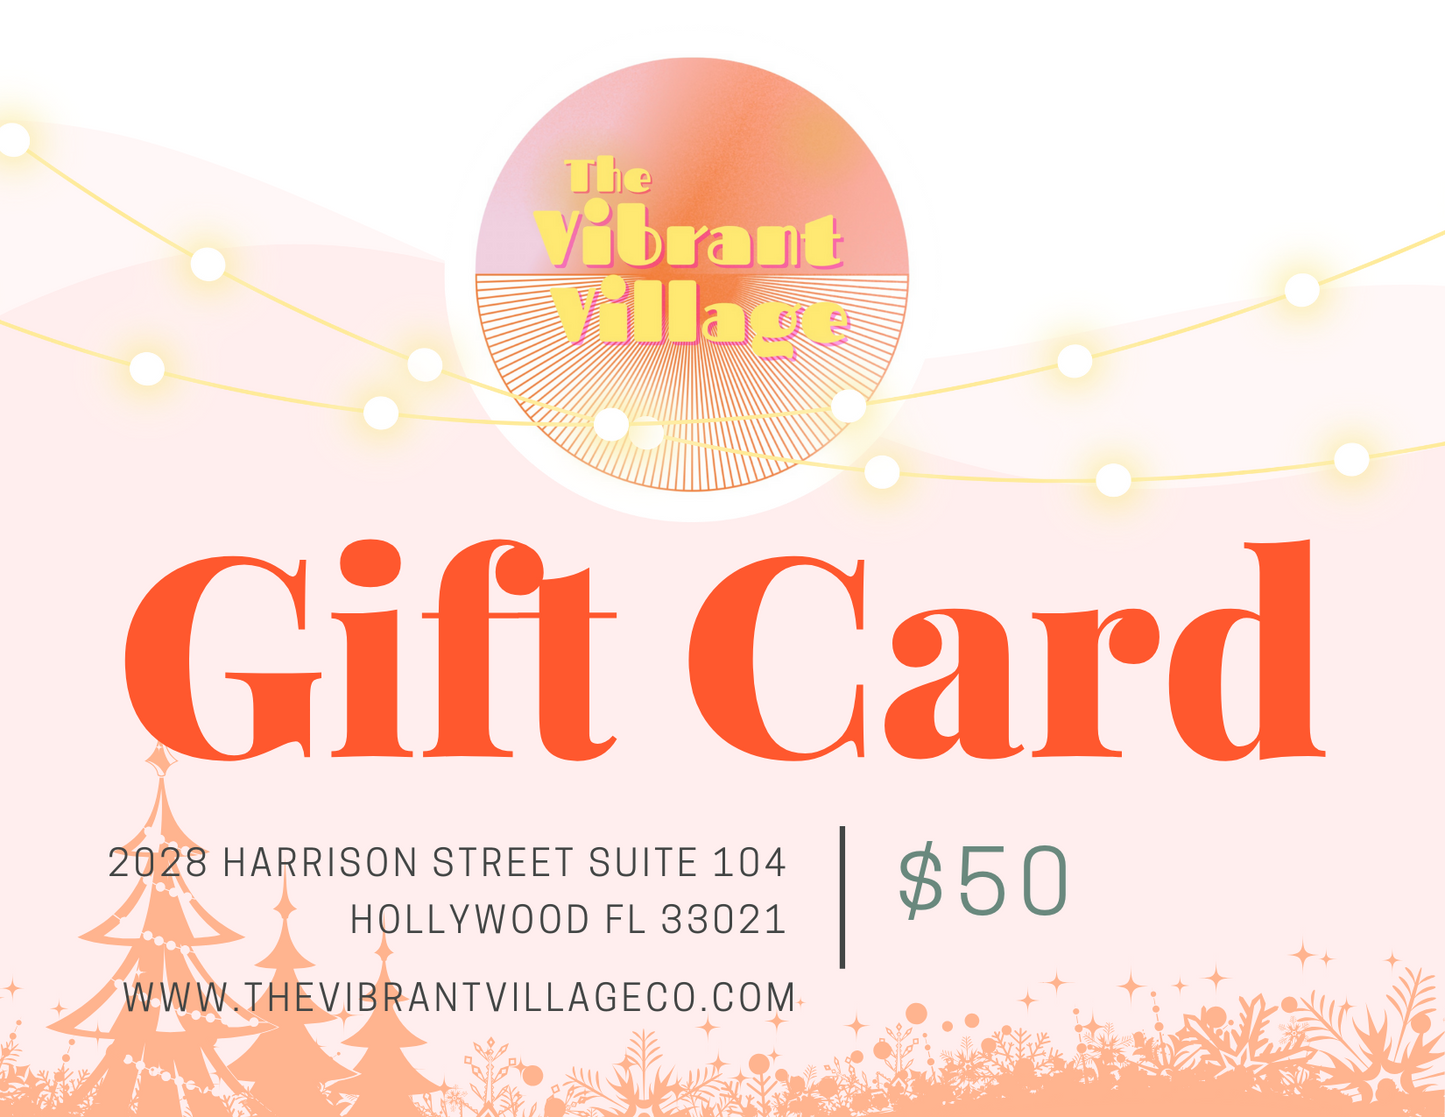 The Gift Card of The Vibrant Village